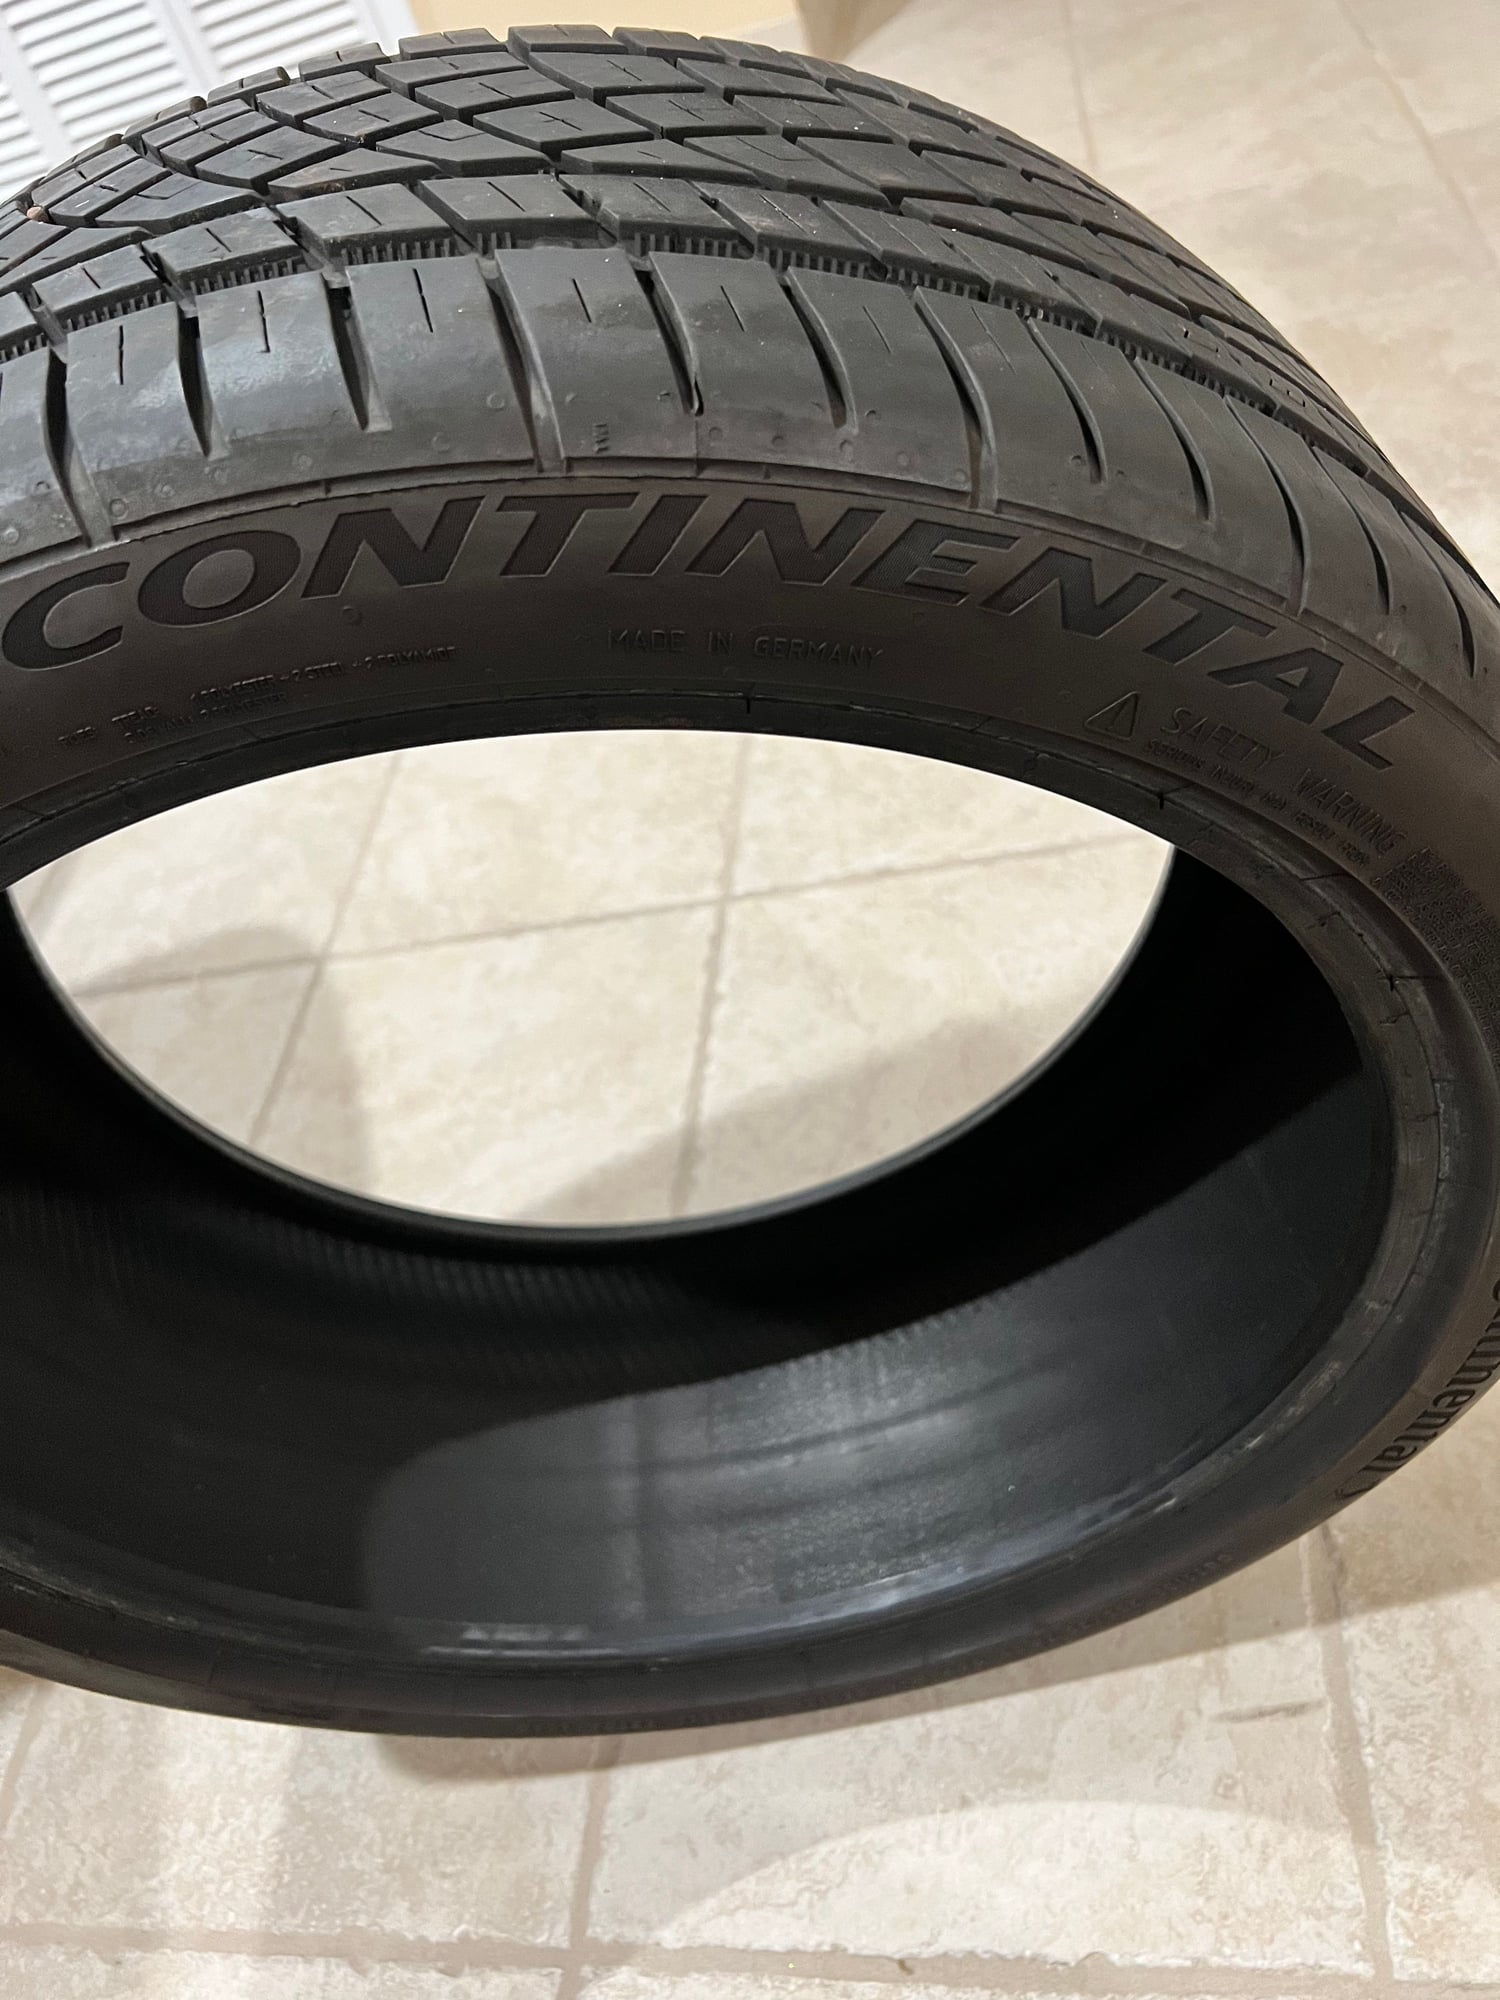 Wheels and Tires/Axles - 4 Continental sport tires - Used - 2017 to 2023 Mercedes-Benz C43 AMG - Oakdale, NY 11716, United States